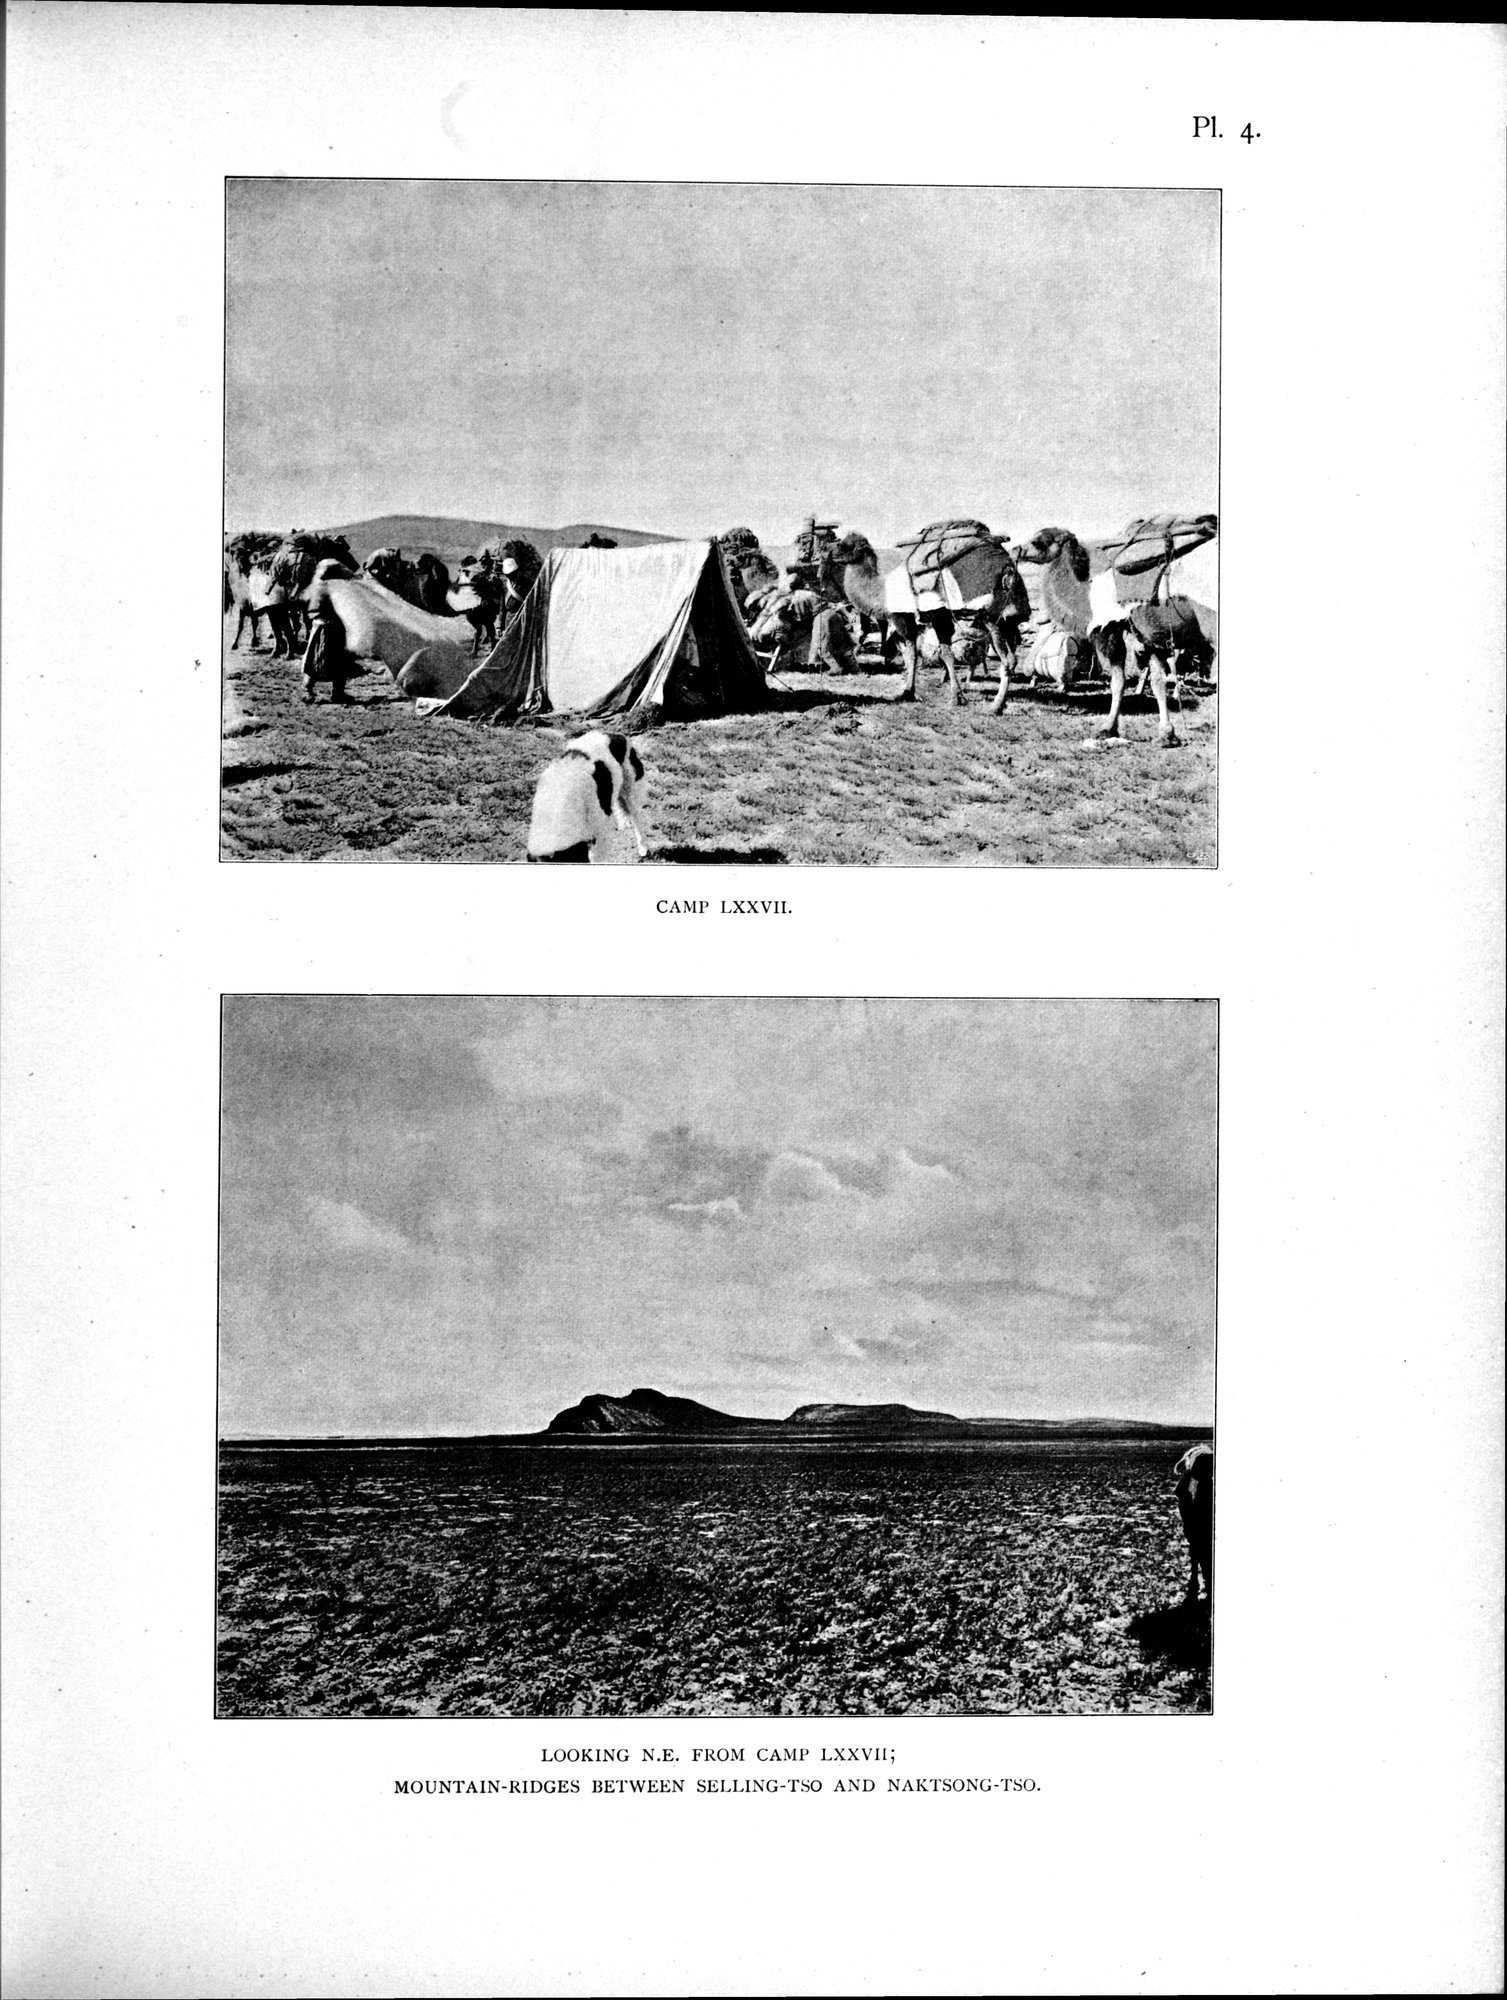 Scientific Results of a Journey in Central Asia, 1899-1902 : vol.4 / Page 59 (Grayscale High Resolution Image)